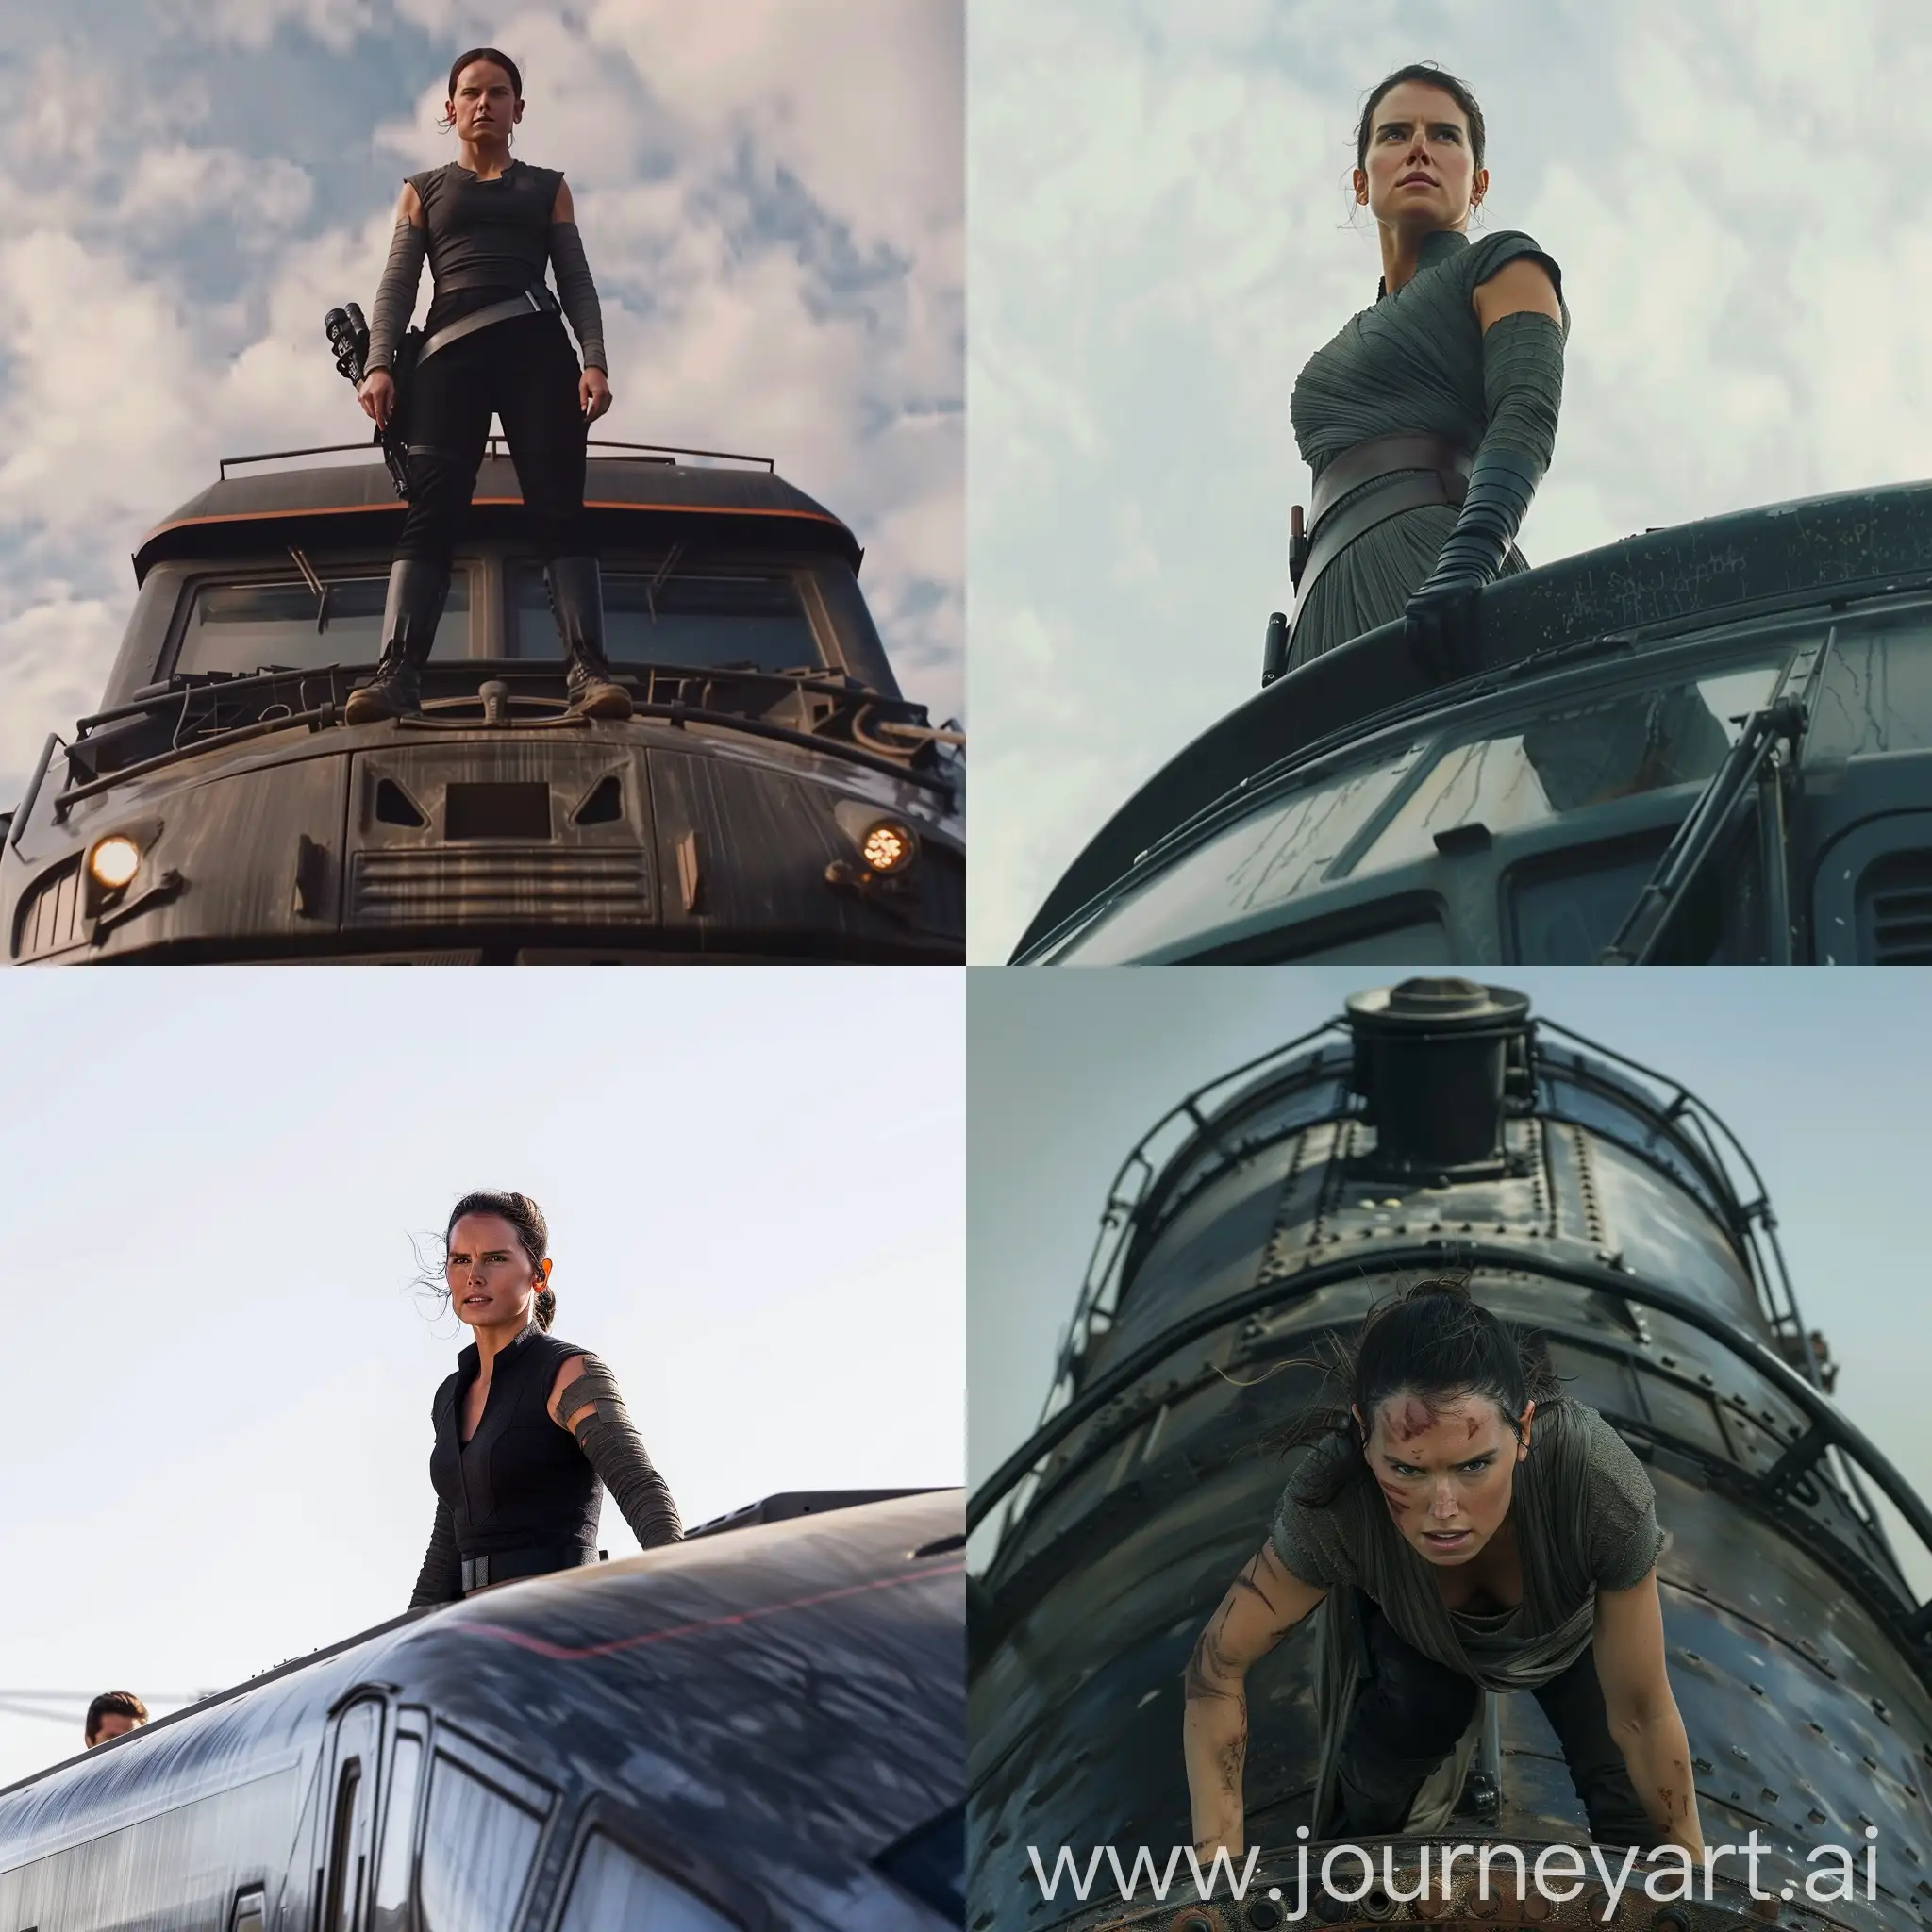 Daisy-Ridley-as-Rey-Skywalker-on-Moving-Train-Action-Scene-in-Mission-Impossible-Movie